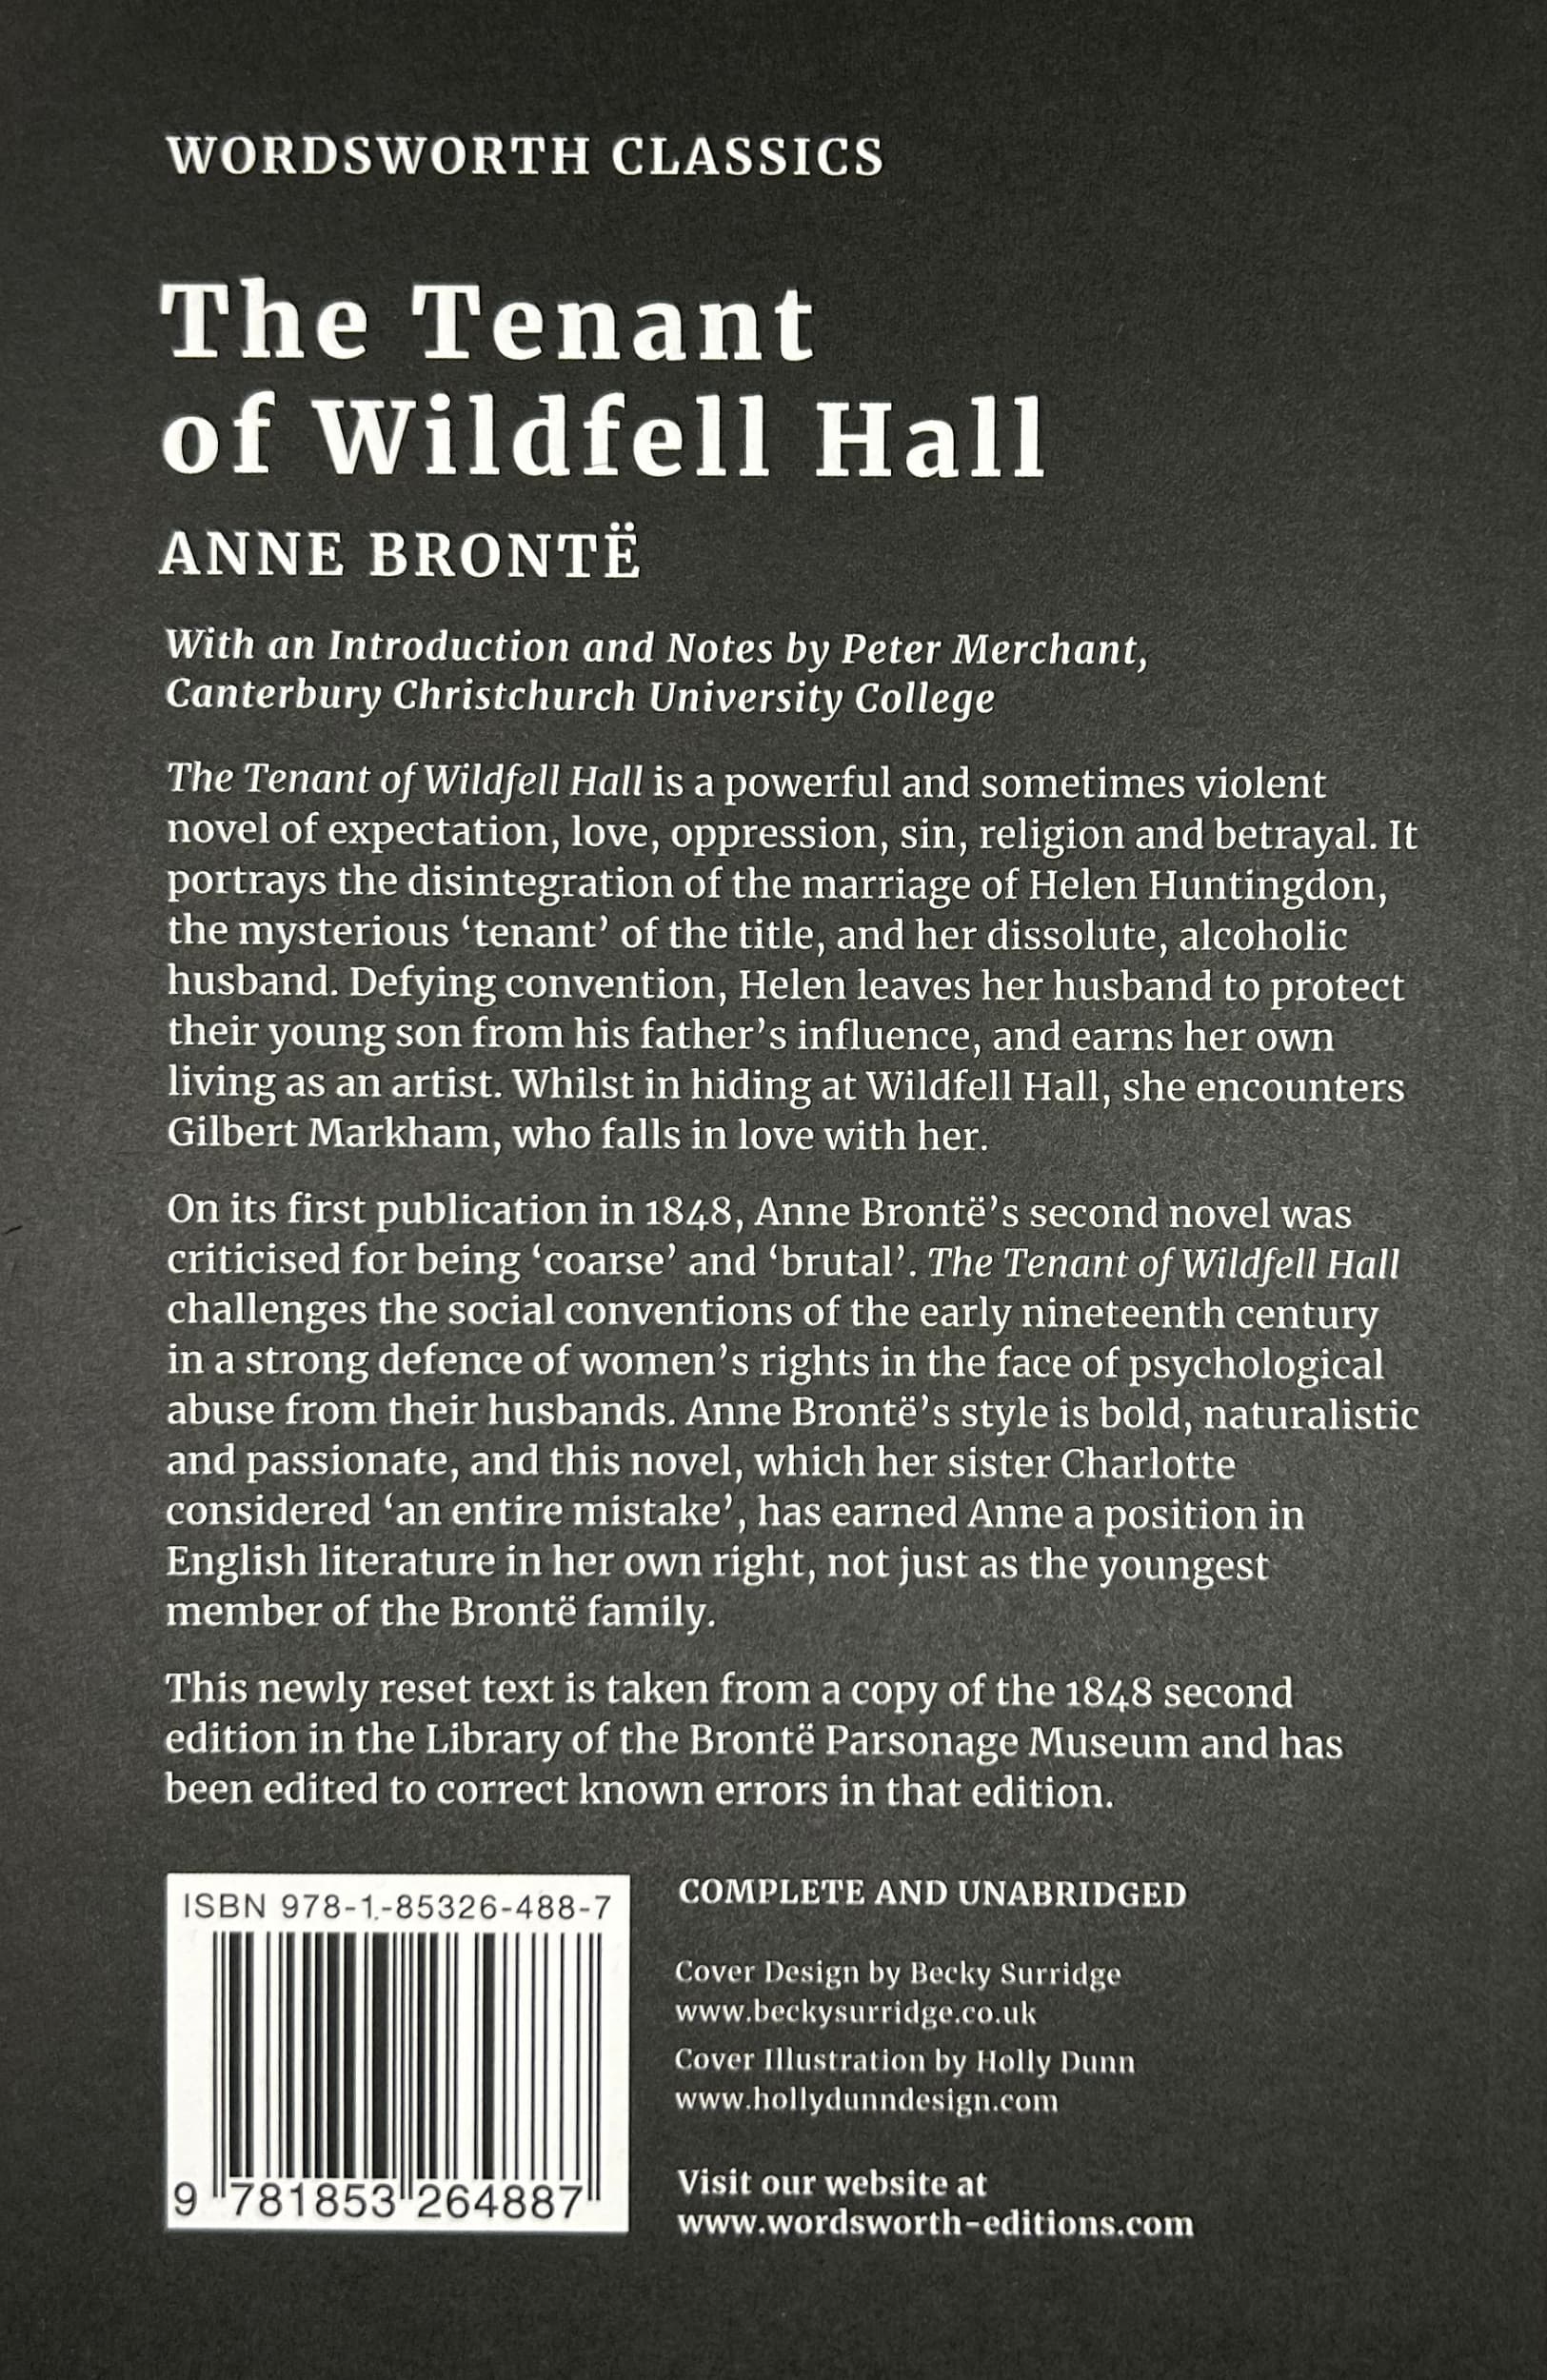 The Tenant of Wildfowl Hall - Back Cover